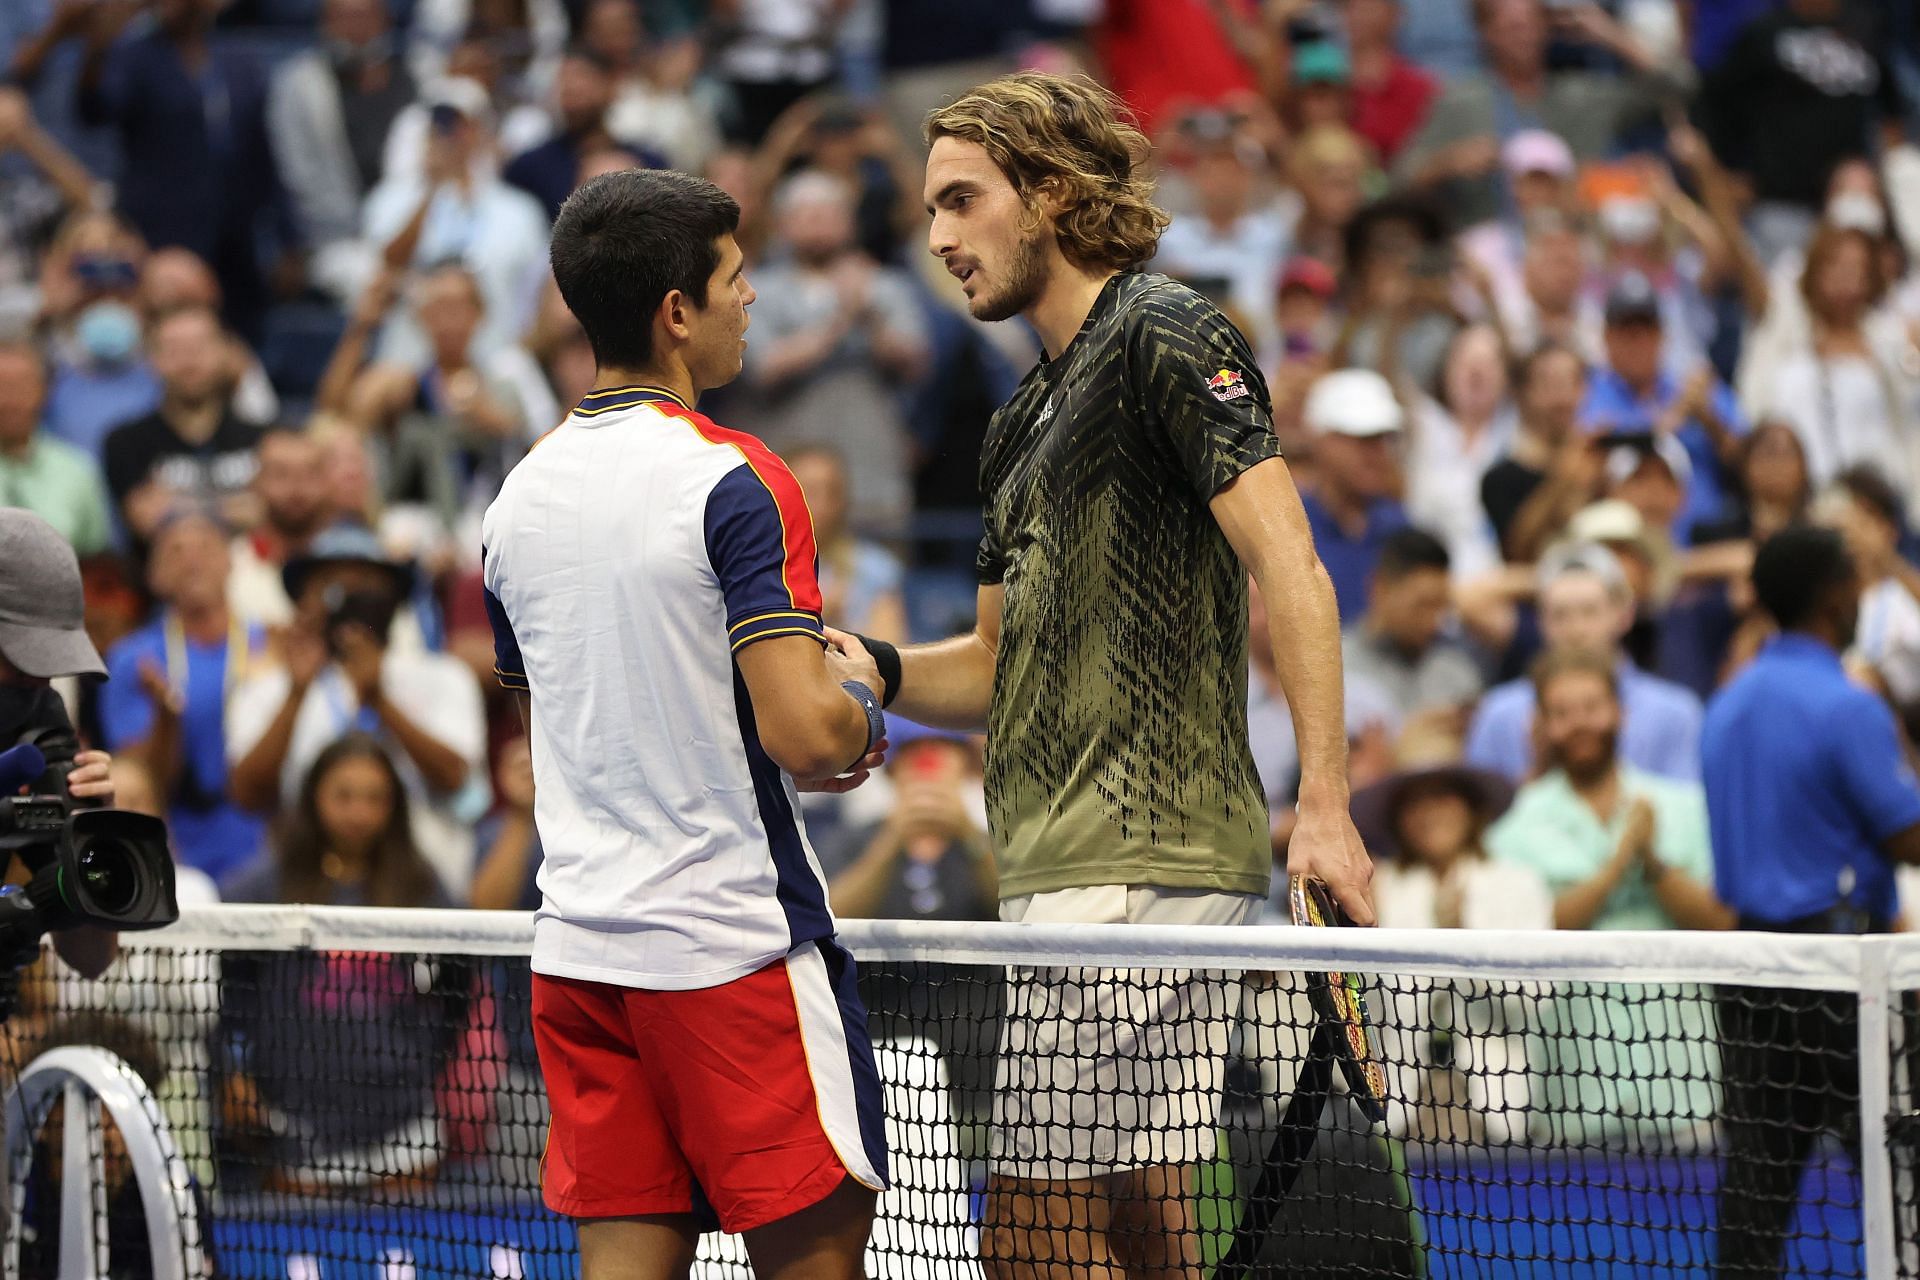 Tsitsipas suffered an early exit at the US Open